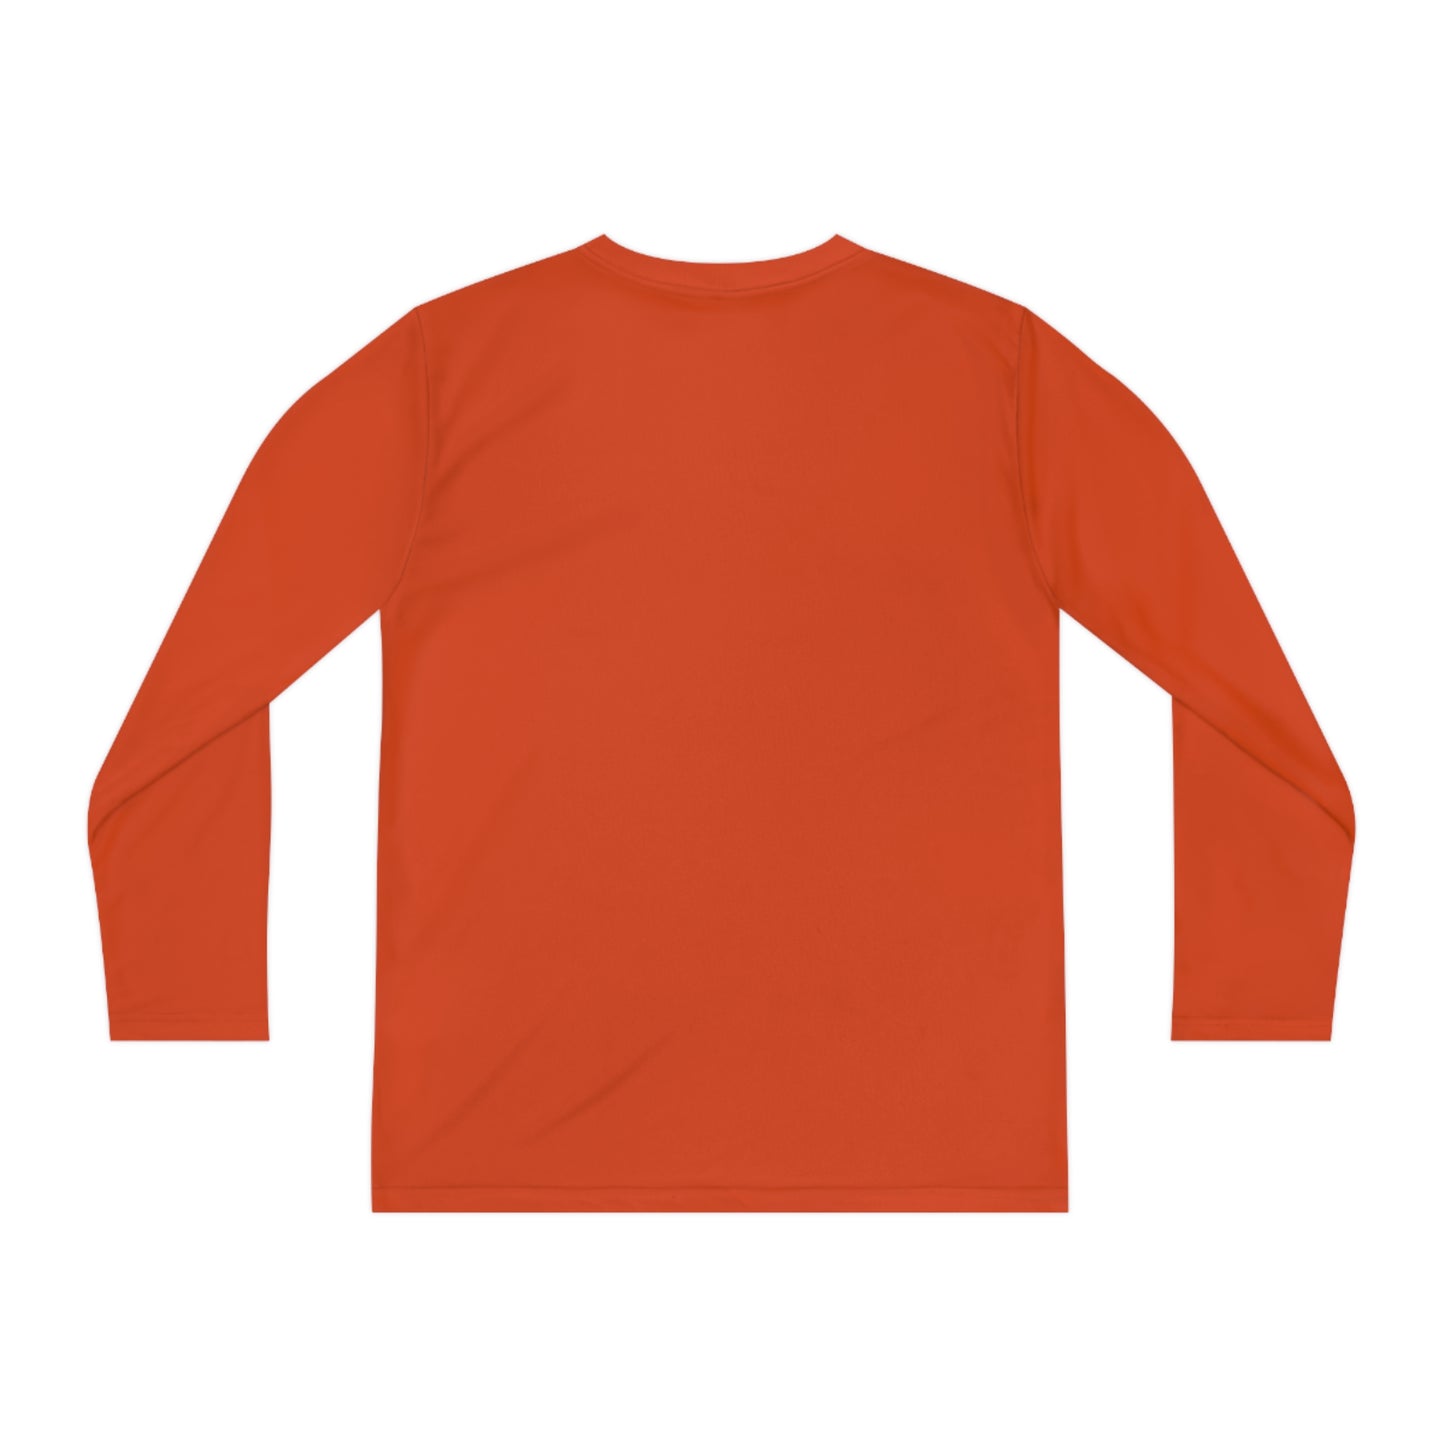 L4L Farm Youth Long Sleeve Competitor Tee